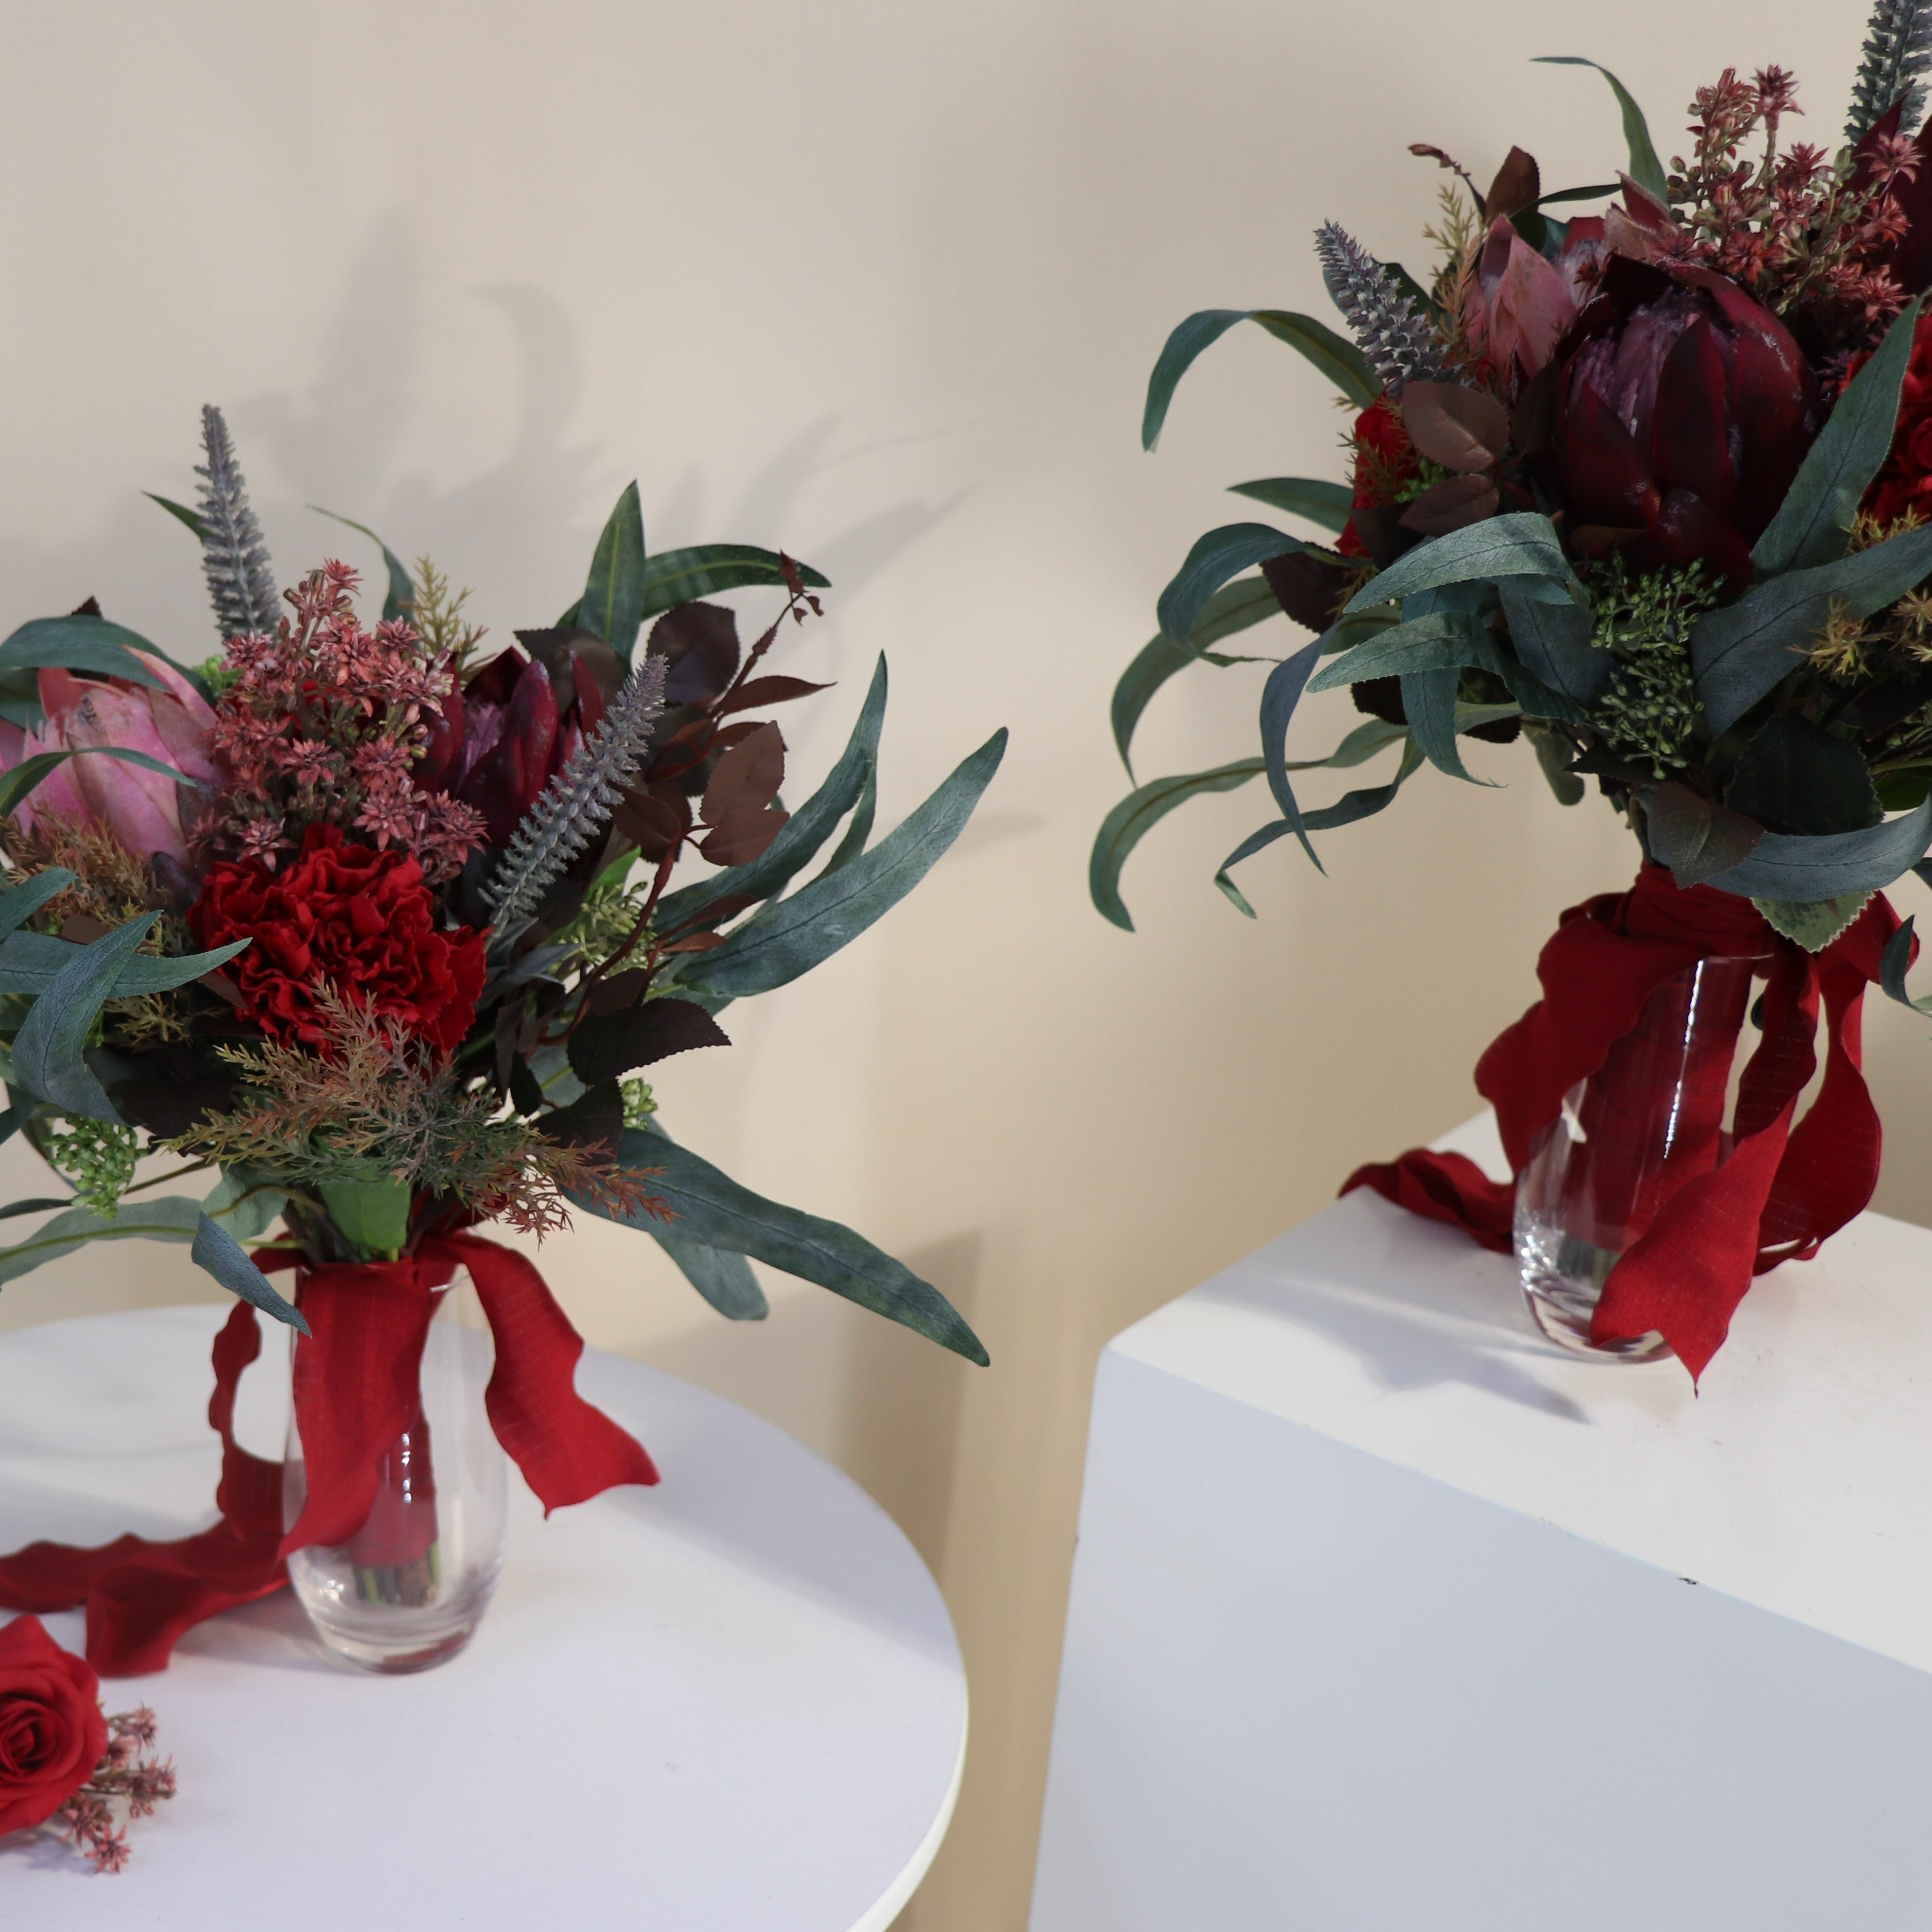 Red Protea - Bouquets (2 sizes)